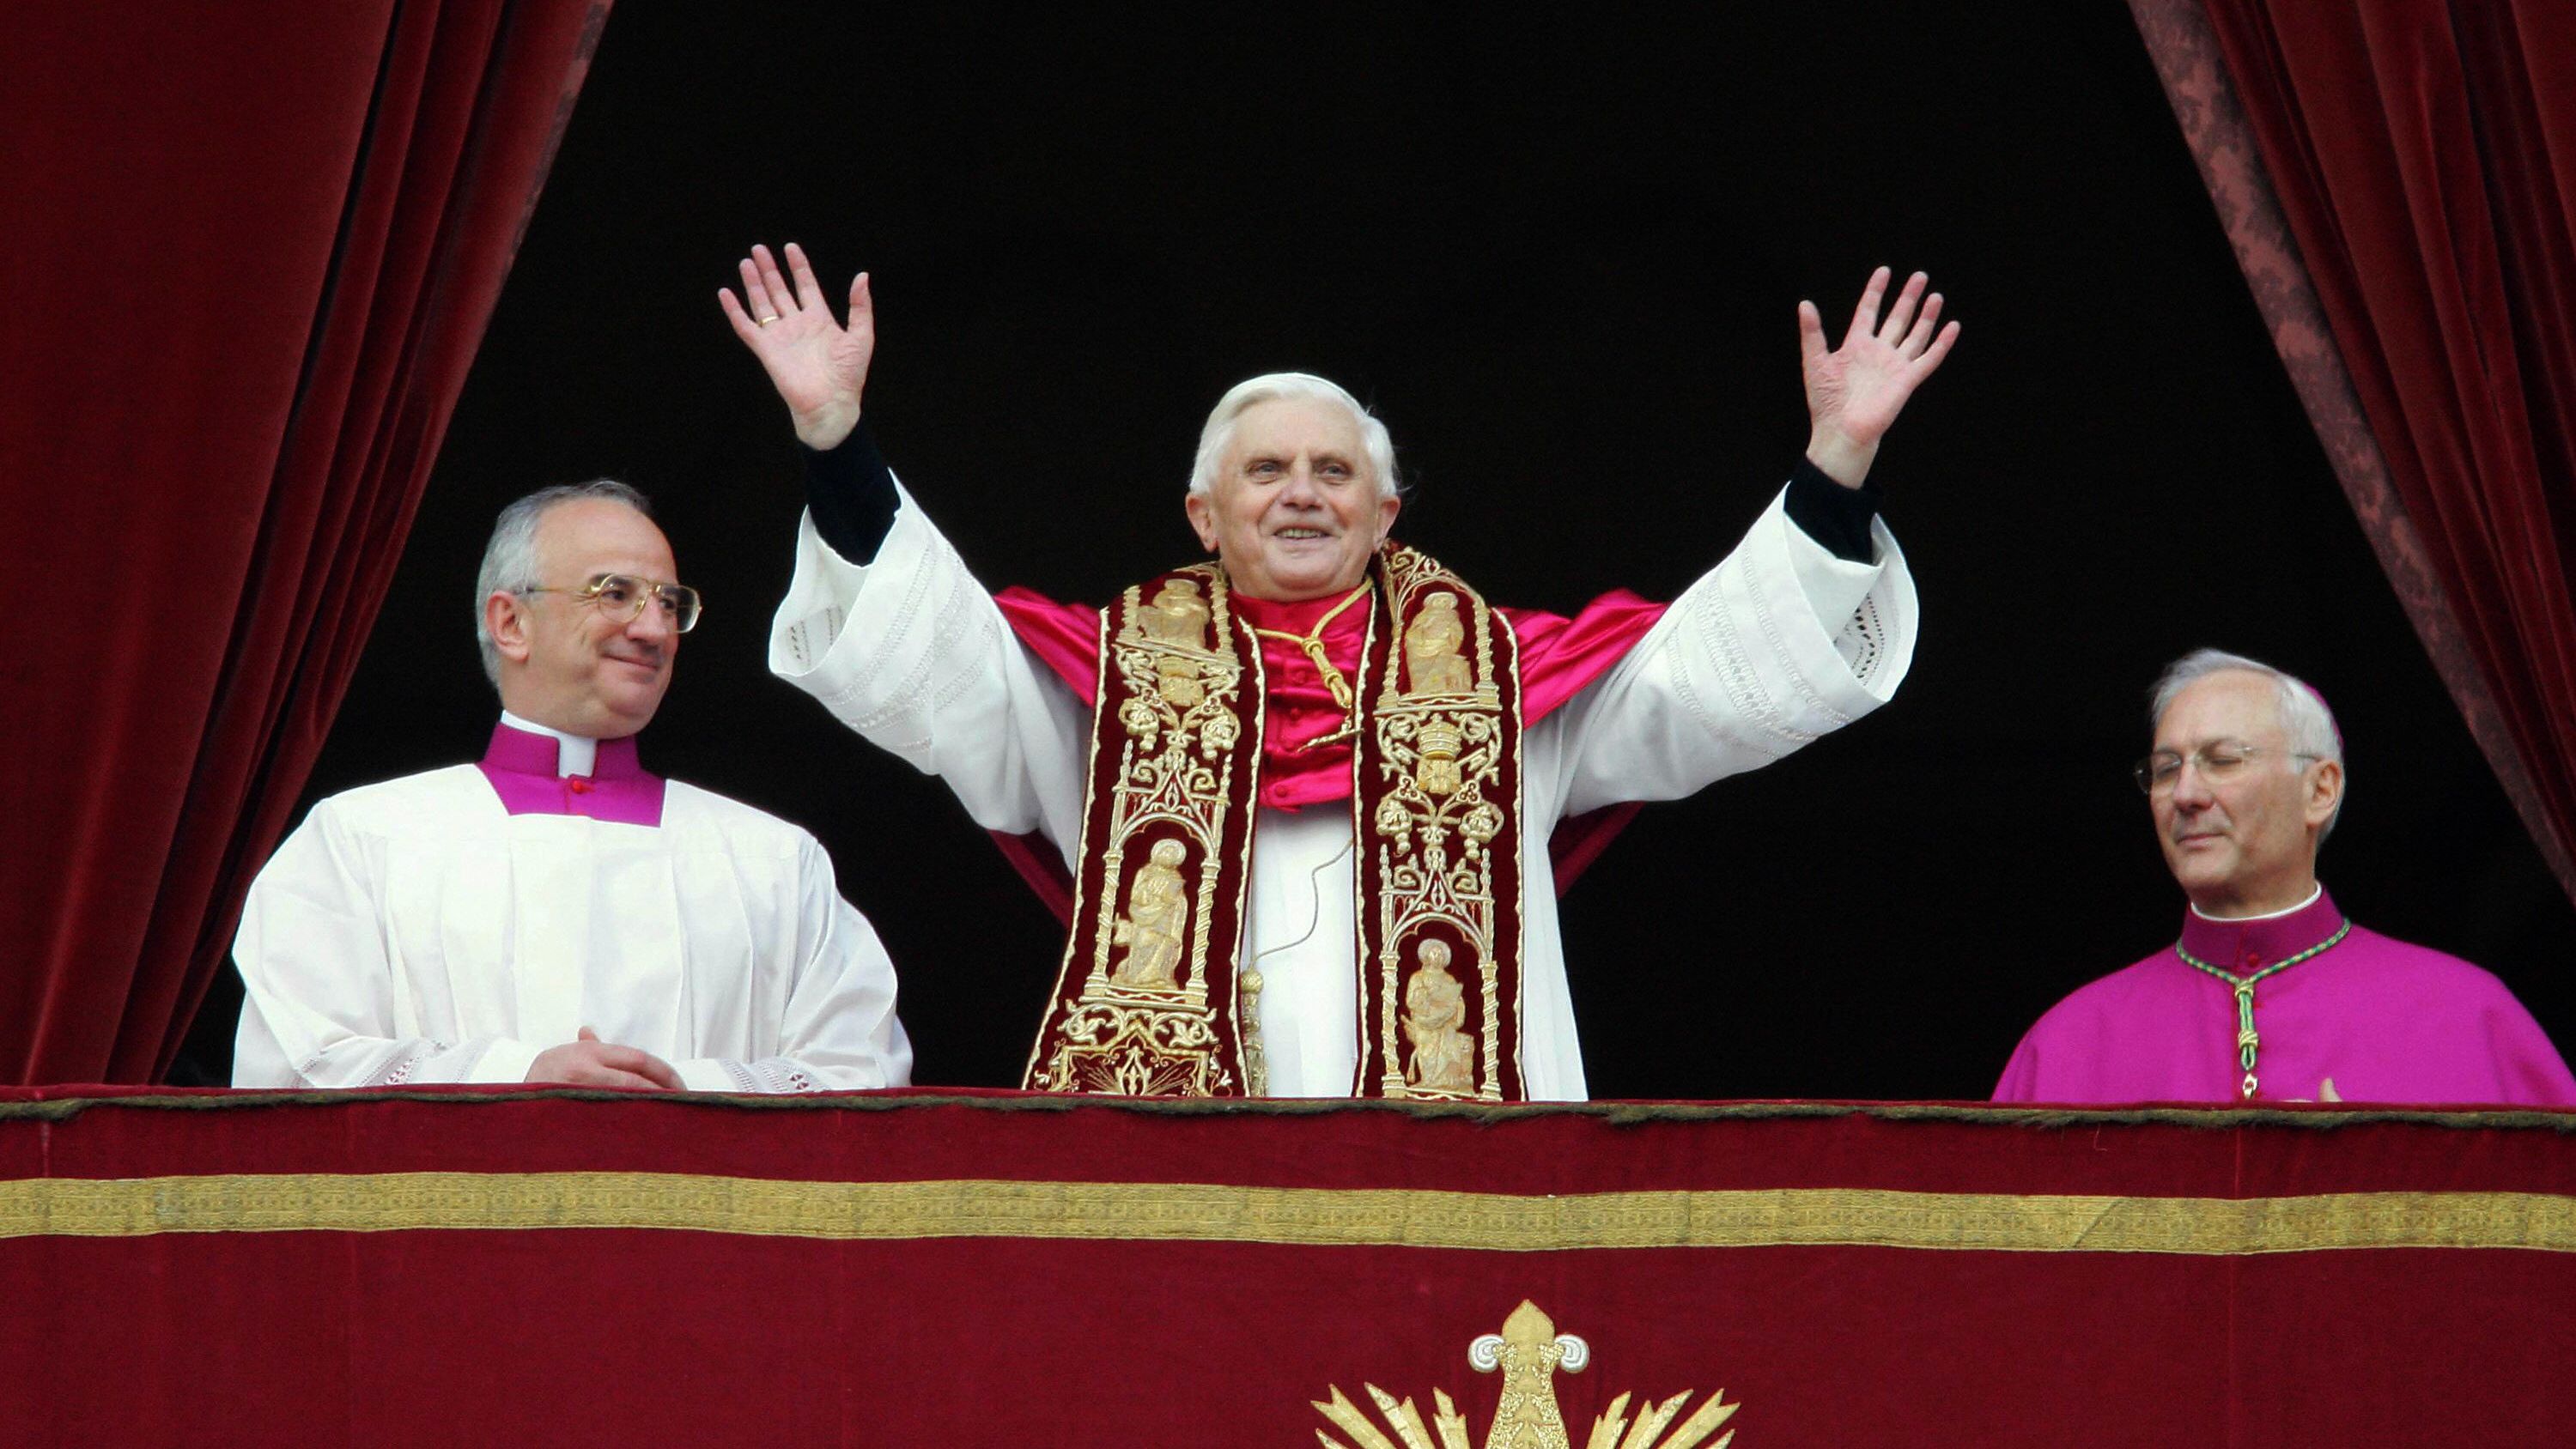 <a href="https://www.cnn.com/2022/12/31/europe/pope-benedict-xvi-death-intl/index.html" target="_blank">Pope Emeritus Benedict XVI</a> died on Saturday, December 31, the Vatican confirmed in a statement. He was 95. Benedict XVI became pope in 2005 and resigned in 2013, citing his "advanced age." He was the first pope to resign since Gregory XII in 1415.